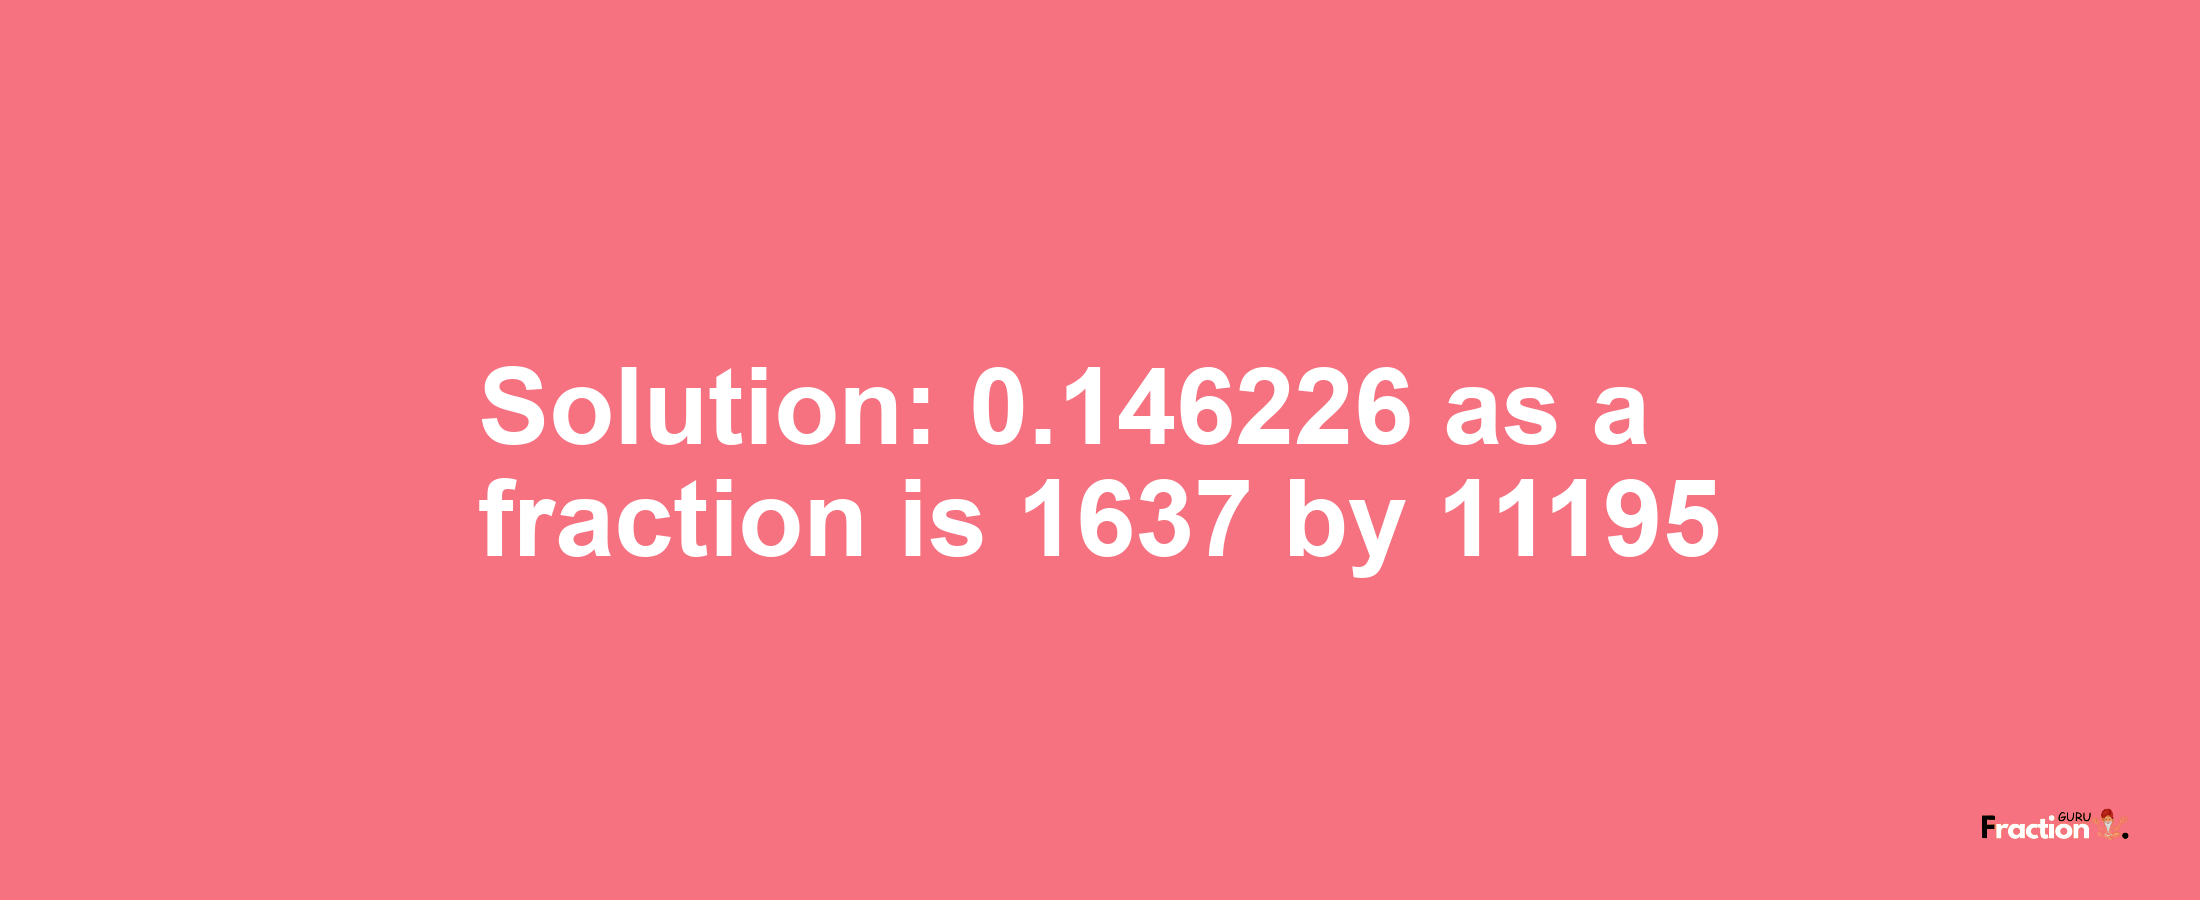 Solution:0.146226 as a fraction is 1637/11195